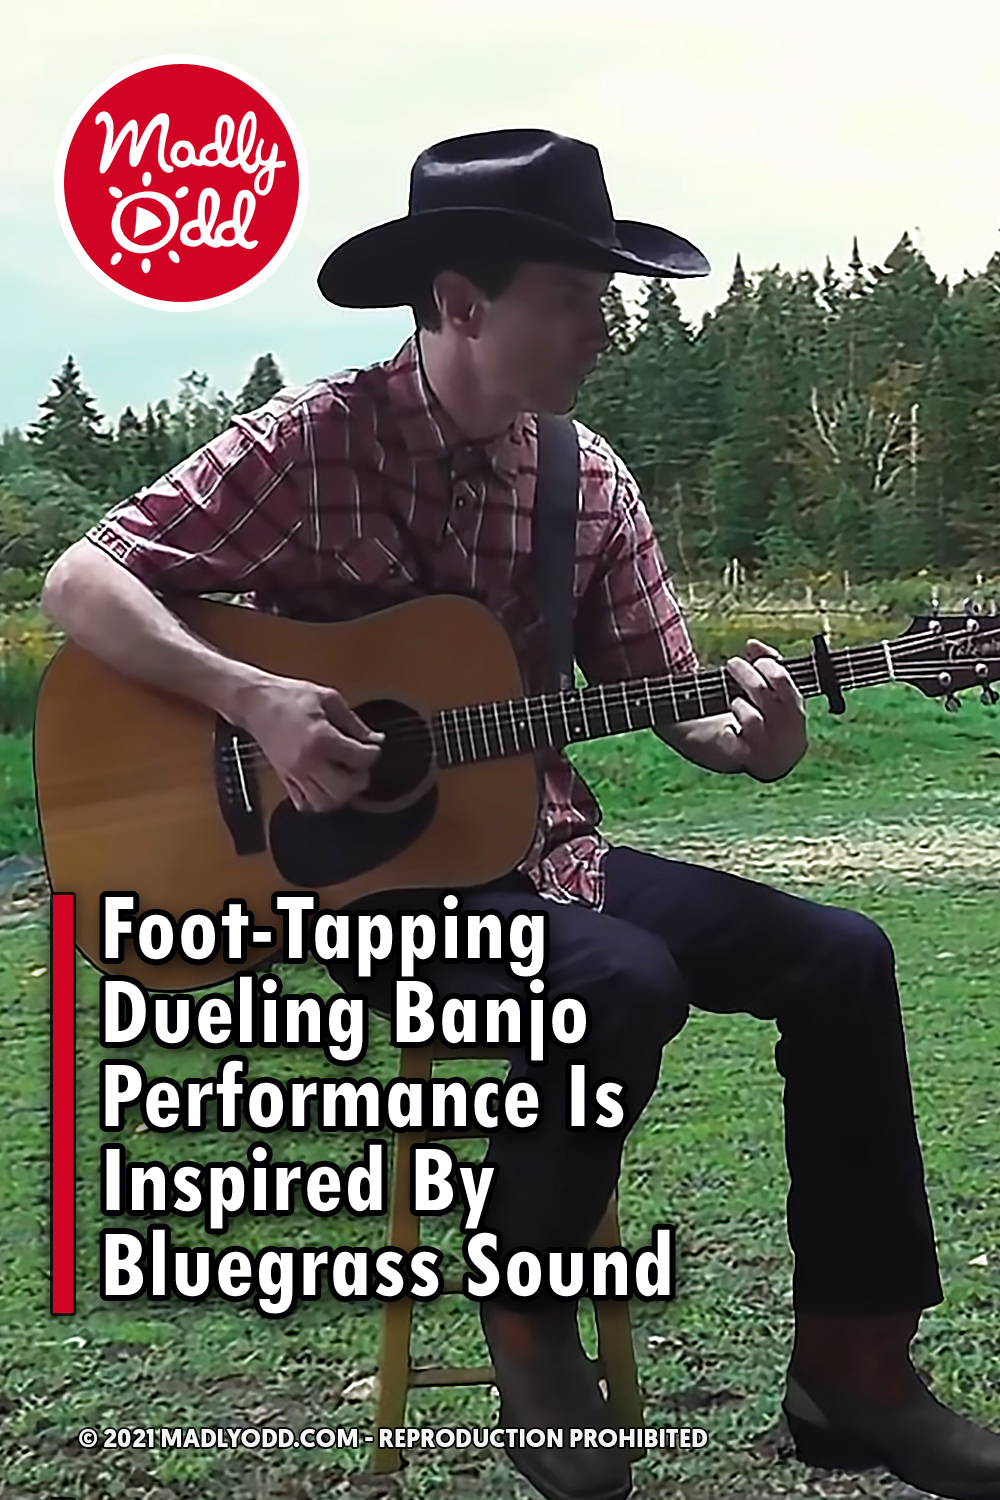 Foot-Tapping Dueling Banjo Performance Is Inspired By Bluegrass Sound